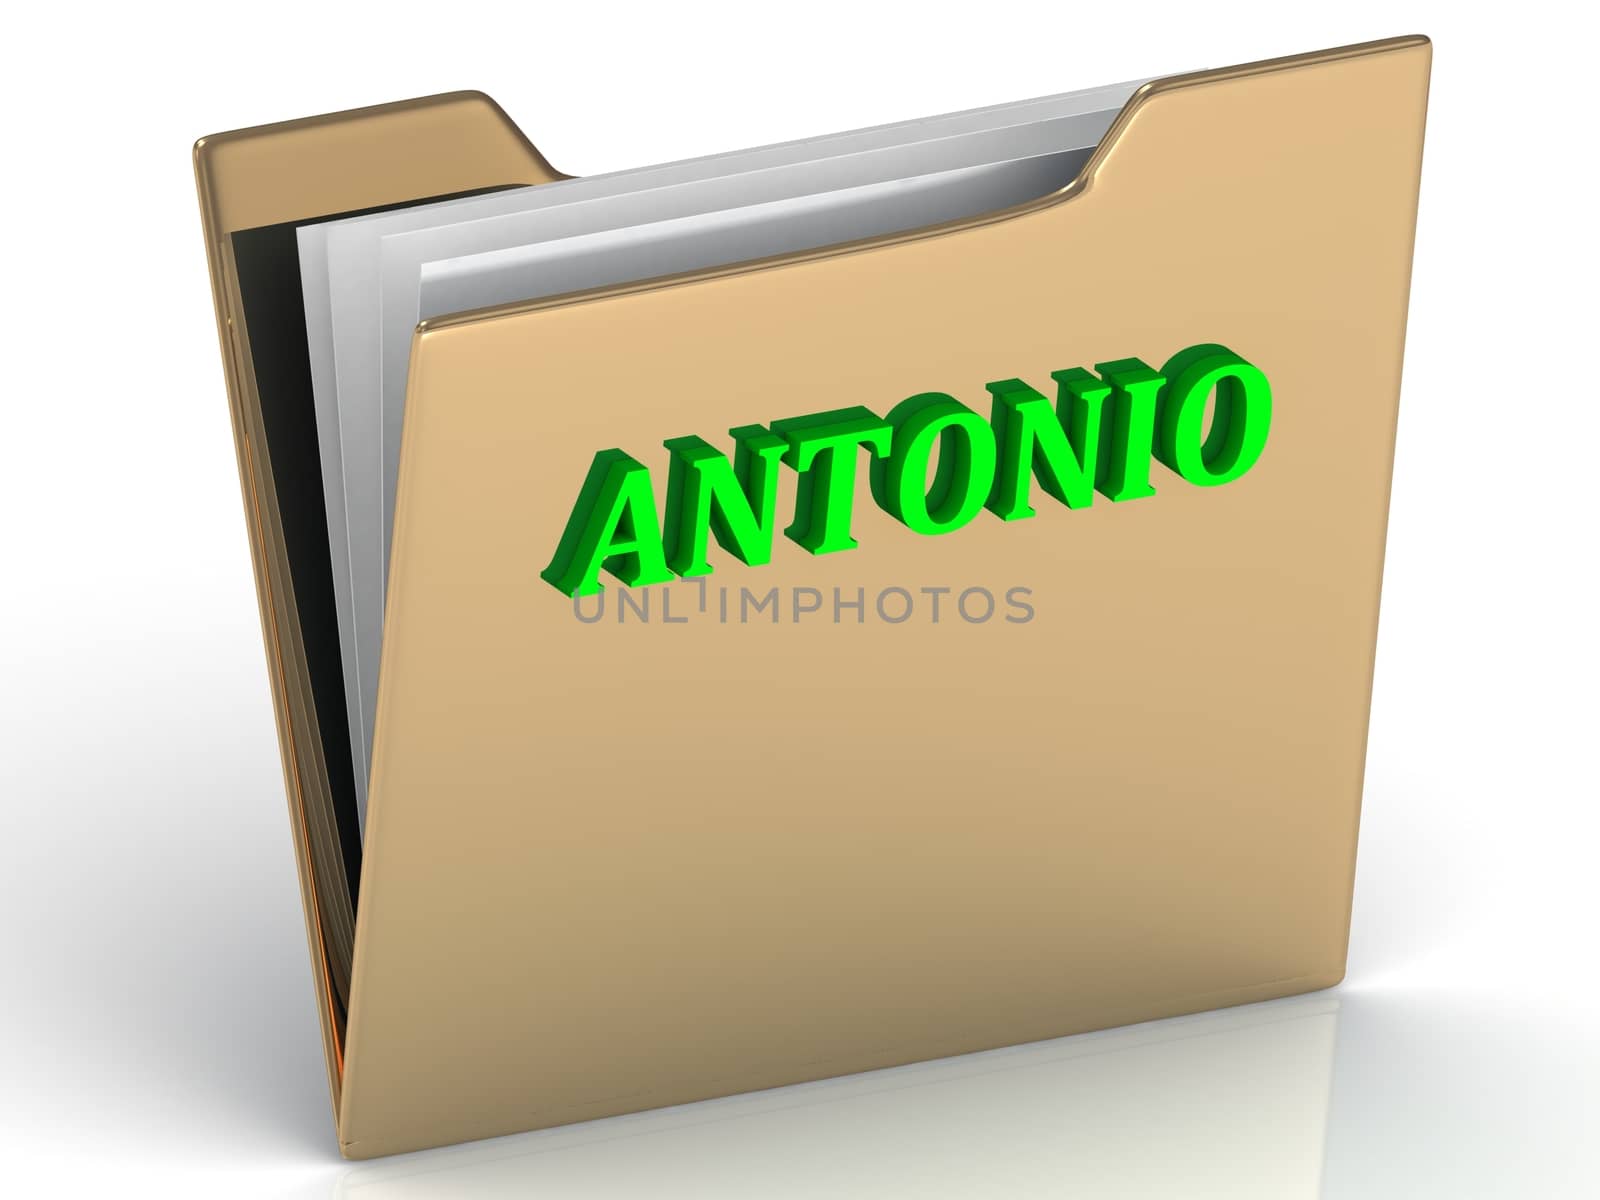 ANTONIO- bright green letters on gold paperwork folder on a white background